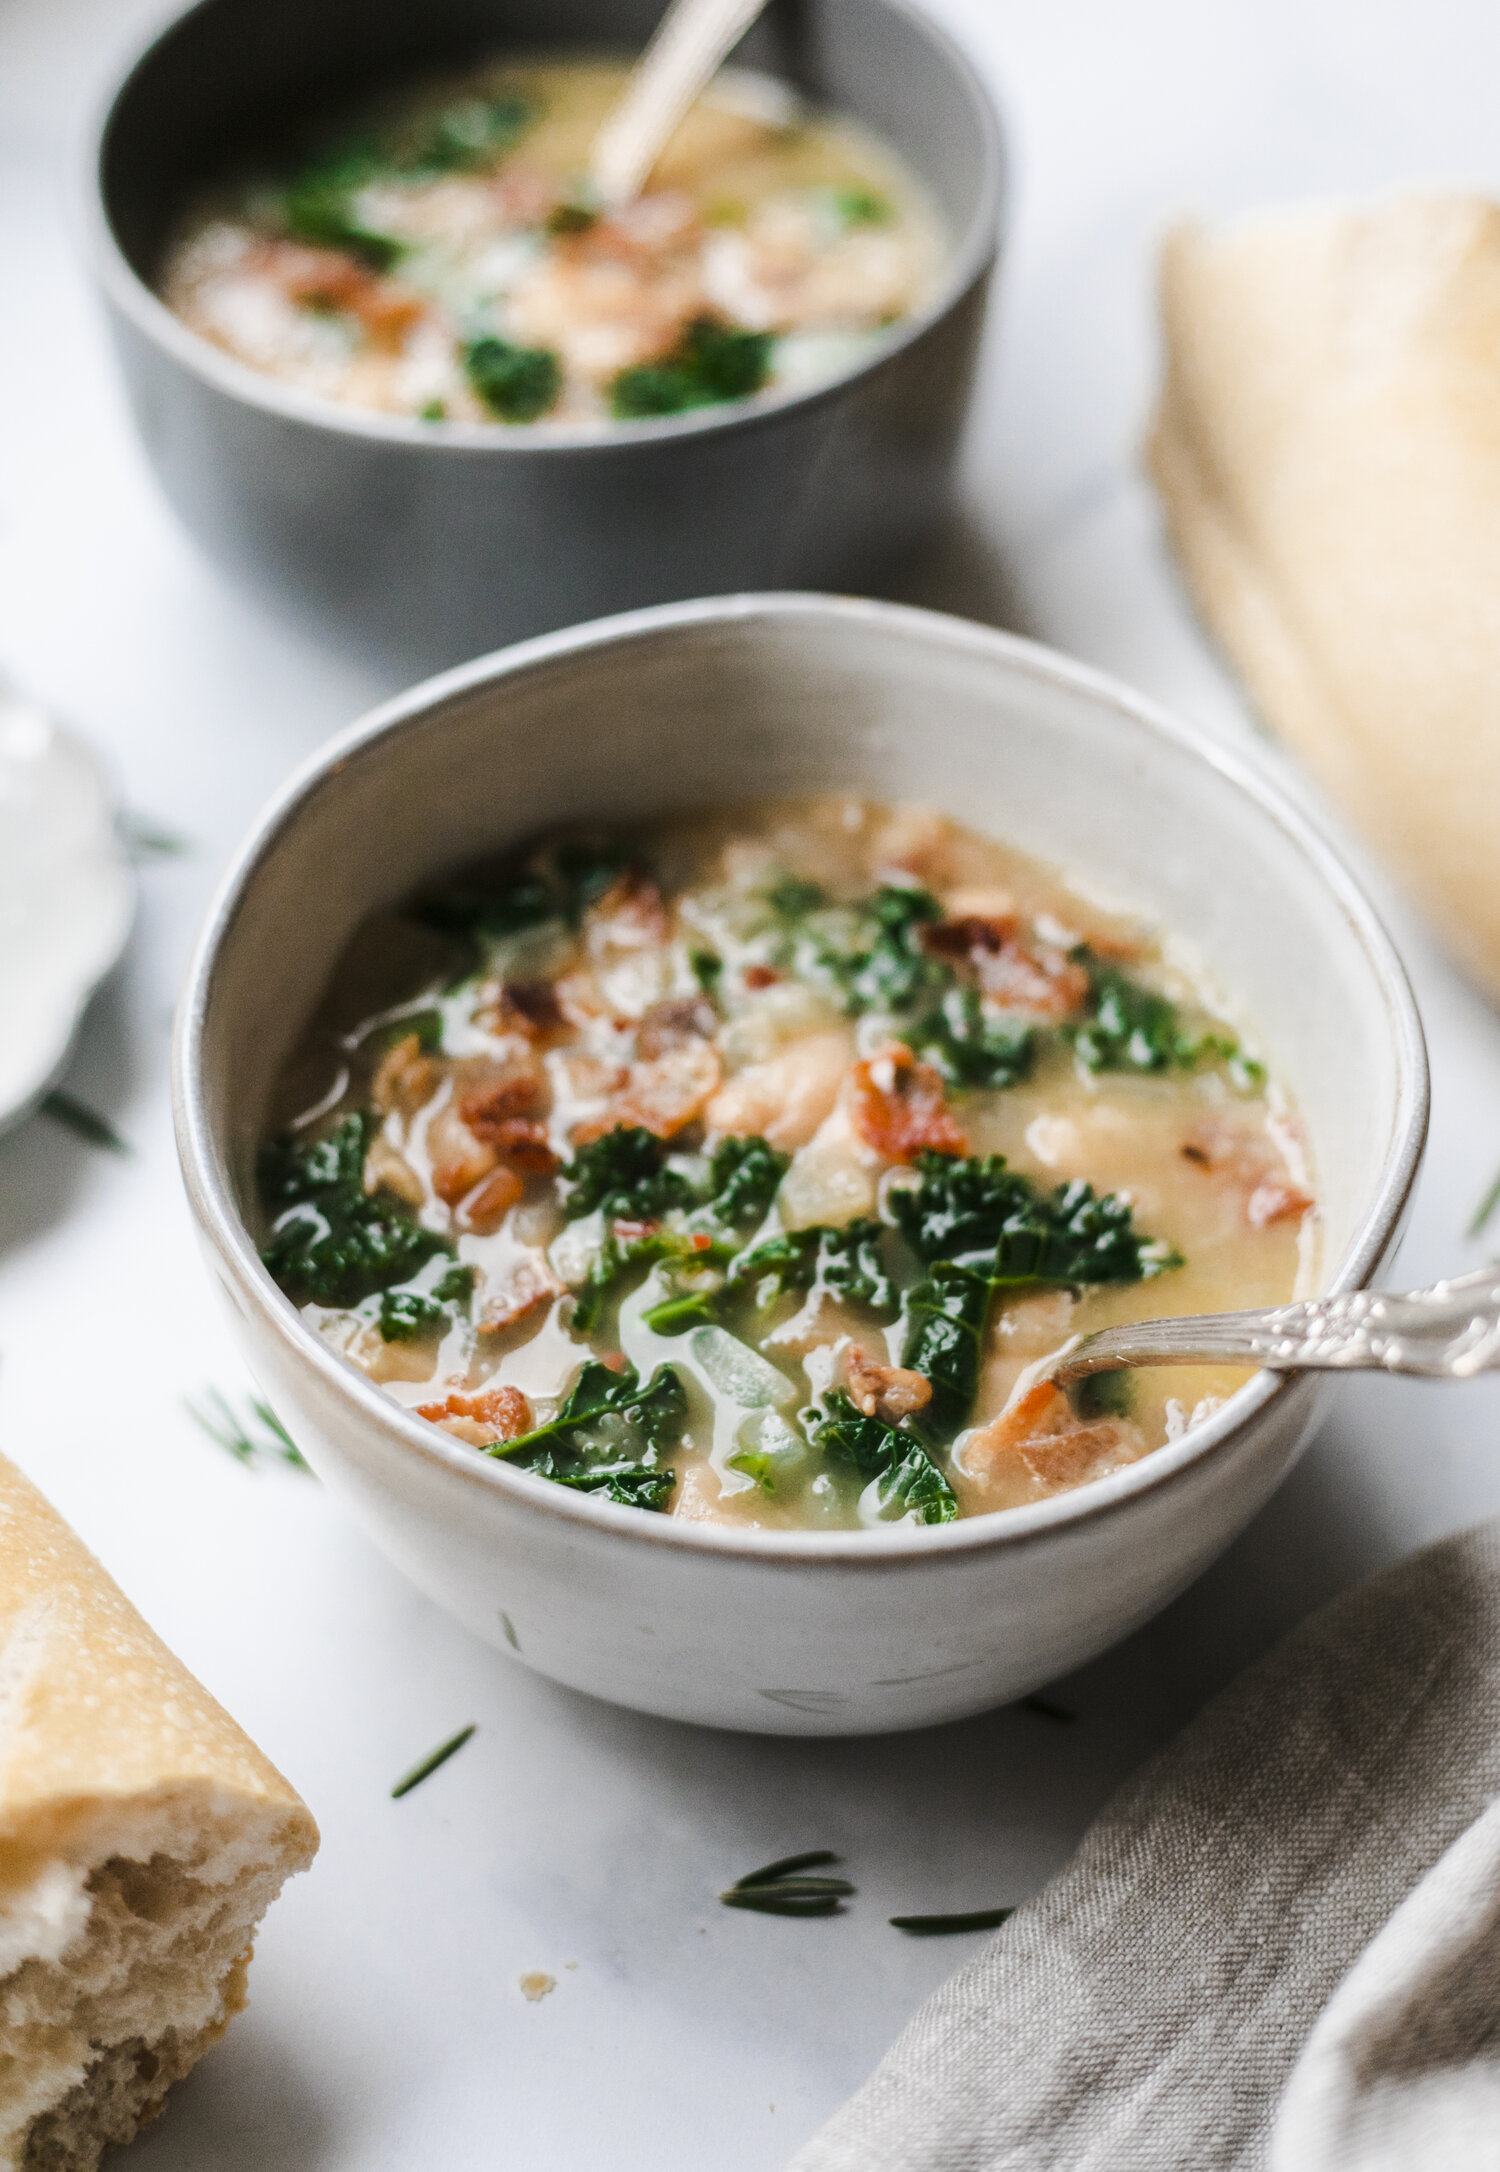 B&B soup — ONE SPRINKLE AT A TIME